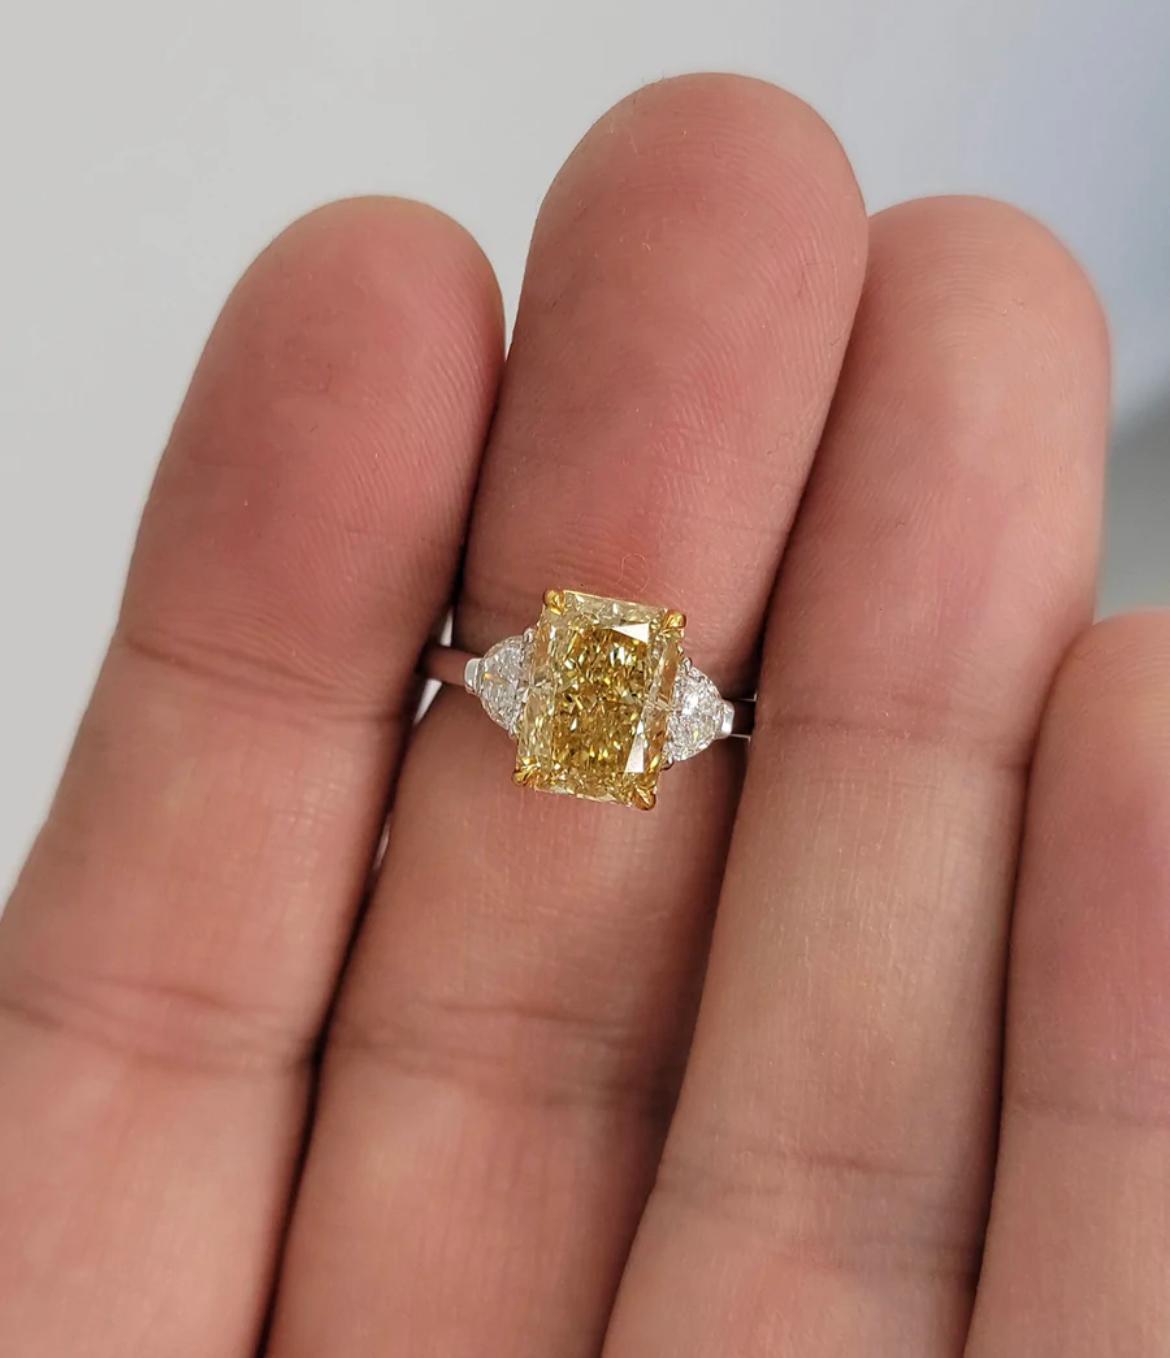 -?Stunning 3ct long Radiant cut certified as Fancy Brownish Yellow 
- Saturated golden yellow color
- 1.39 Ratio
- Color very evenly spread throughout the stone
- Fiery diamond
- Set in Platinum and 18kt YG with 0.40ct total weight F VS Half Moons